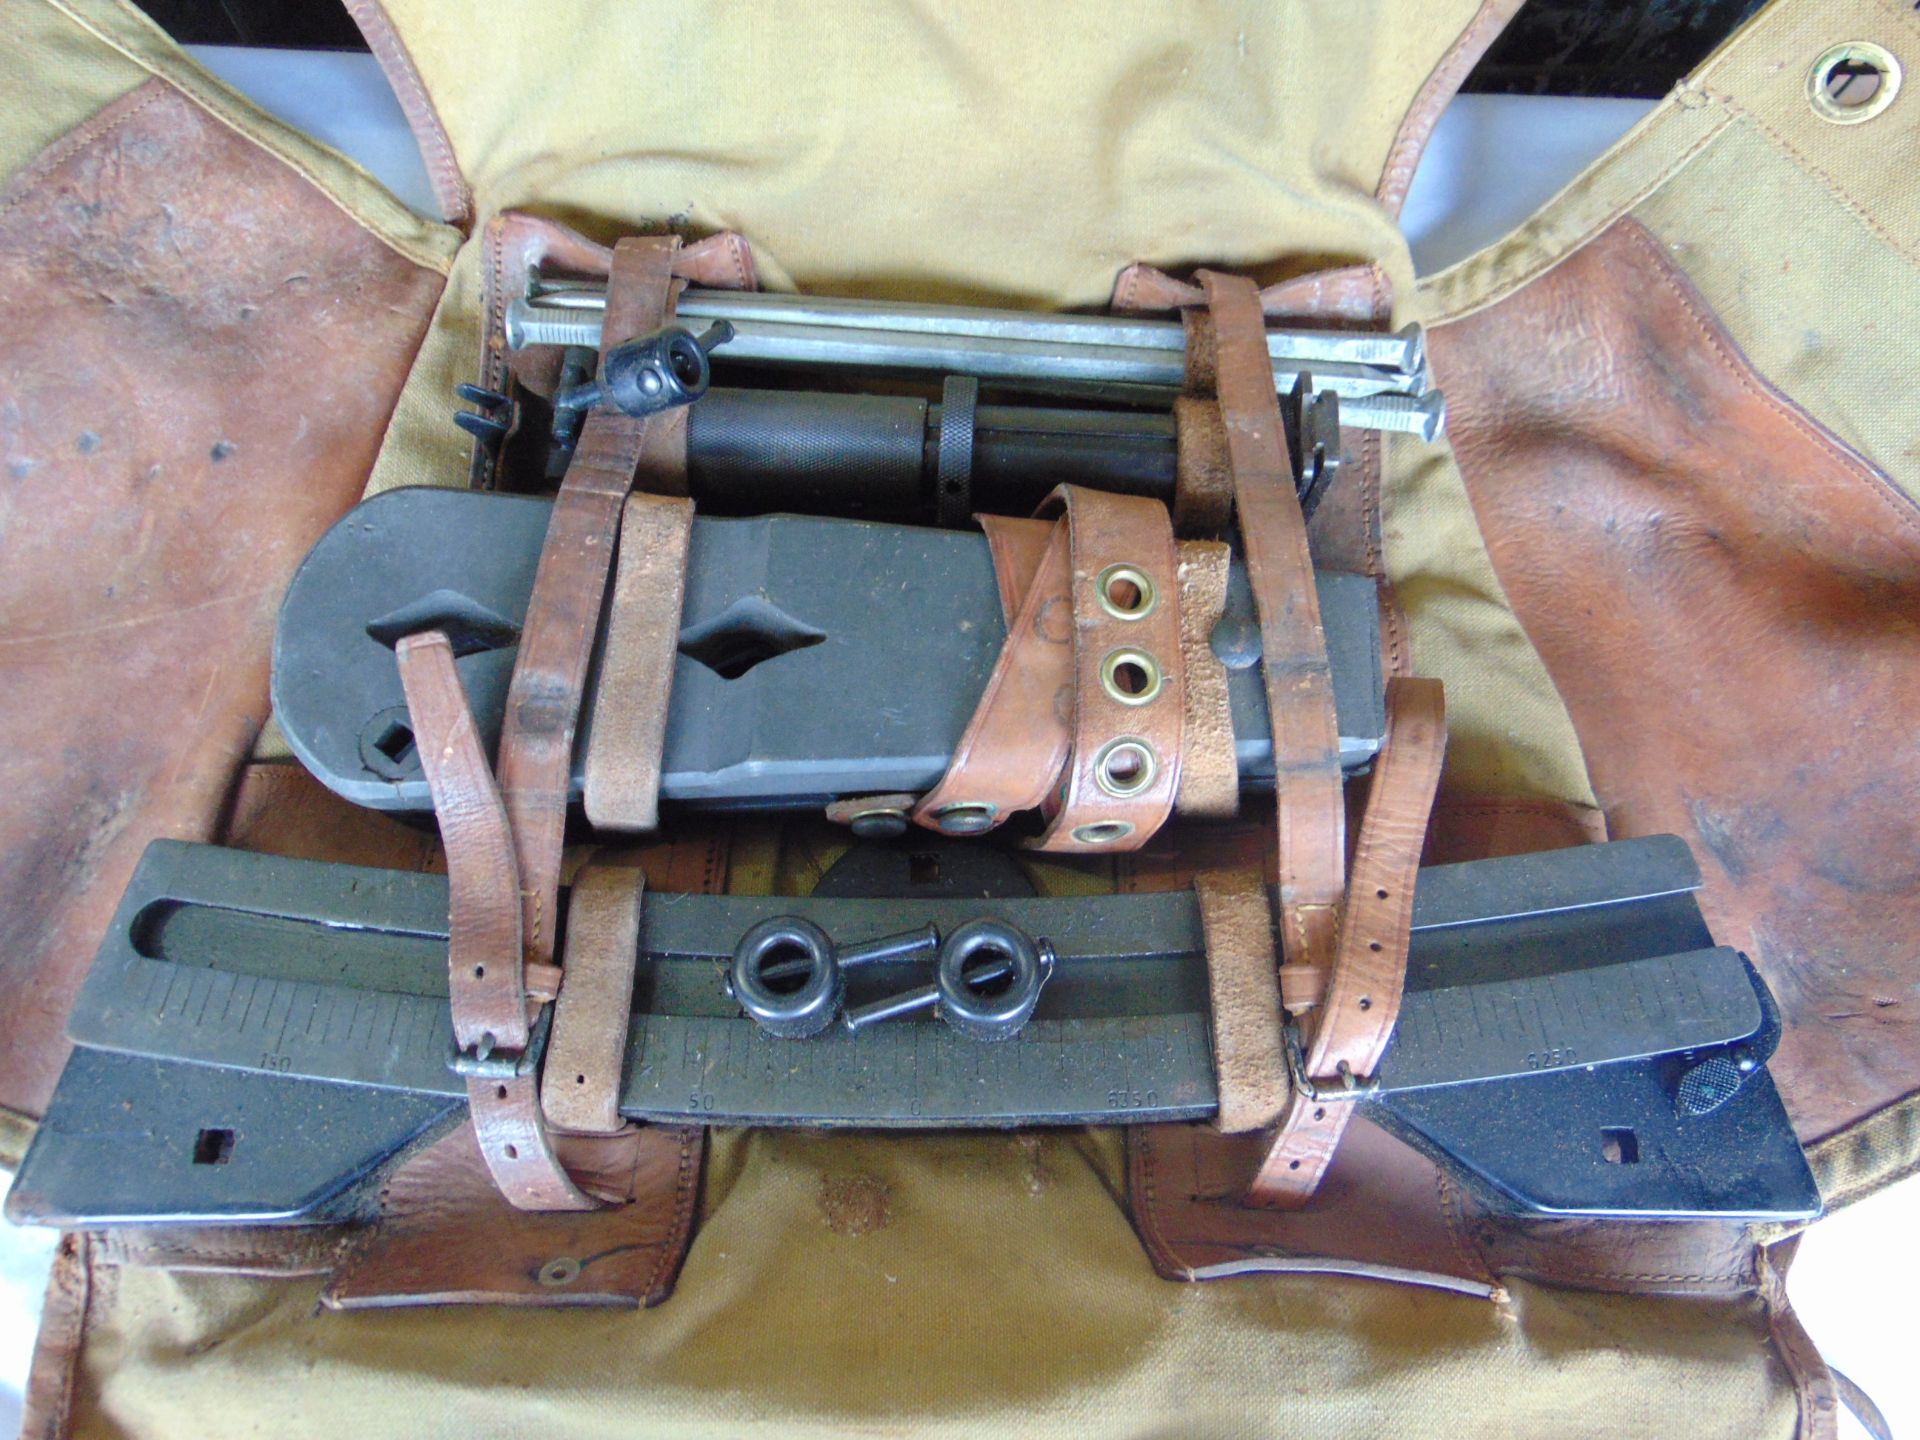 V Rare Unissued MG 13 Complete Sustained Fire Kit in original canvas pouch with leather straps - Image 2 of 3